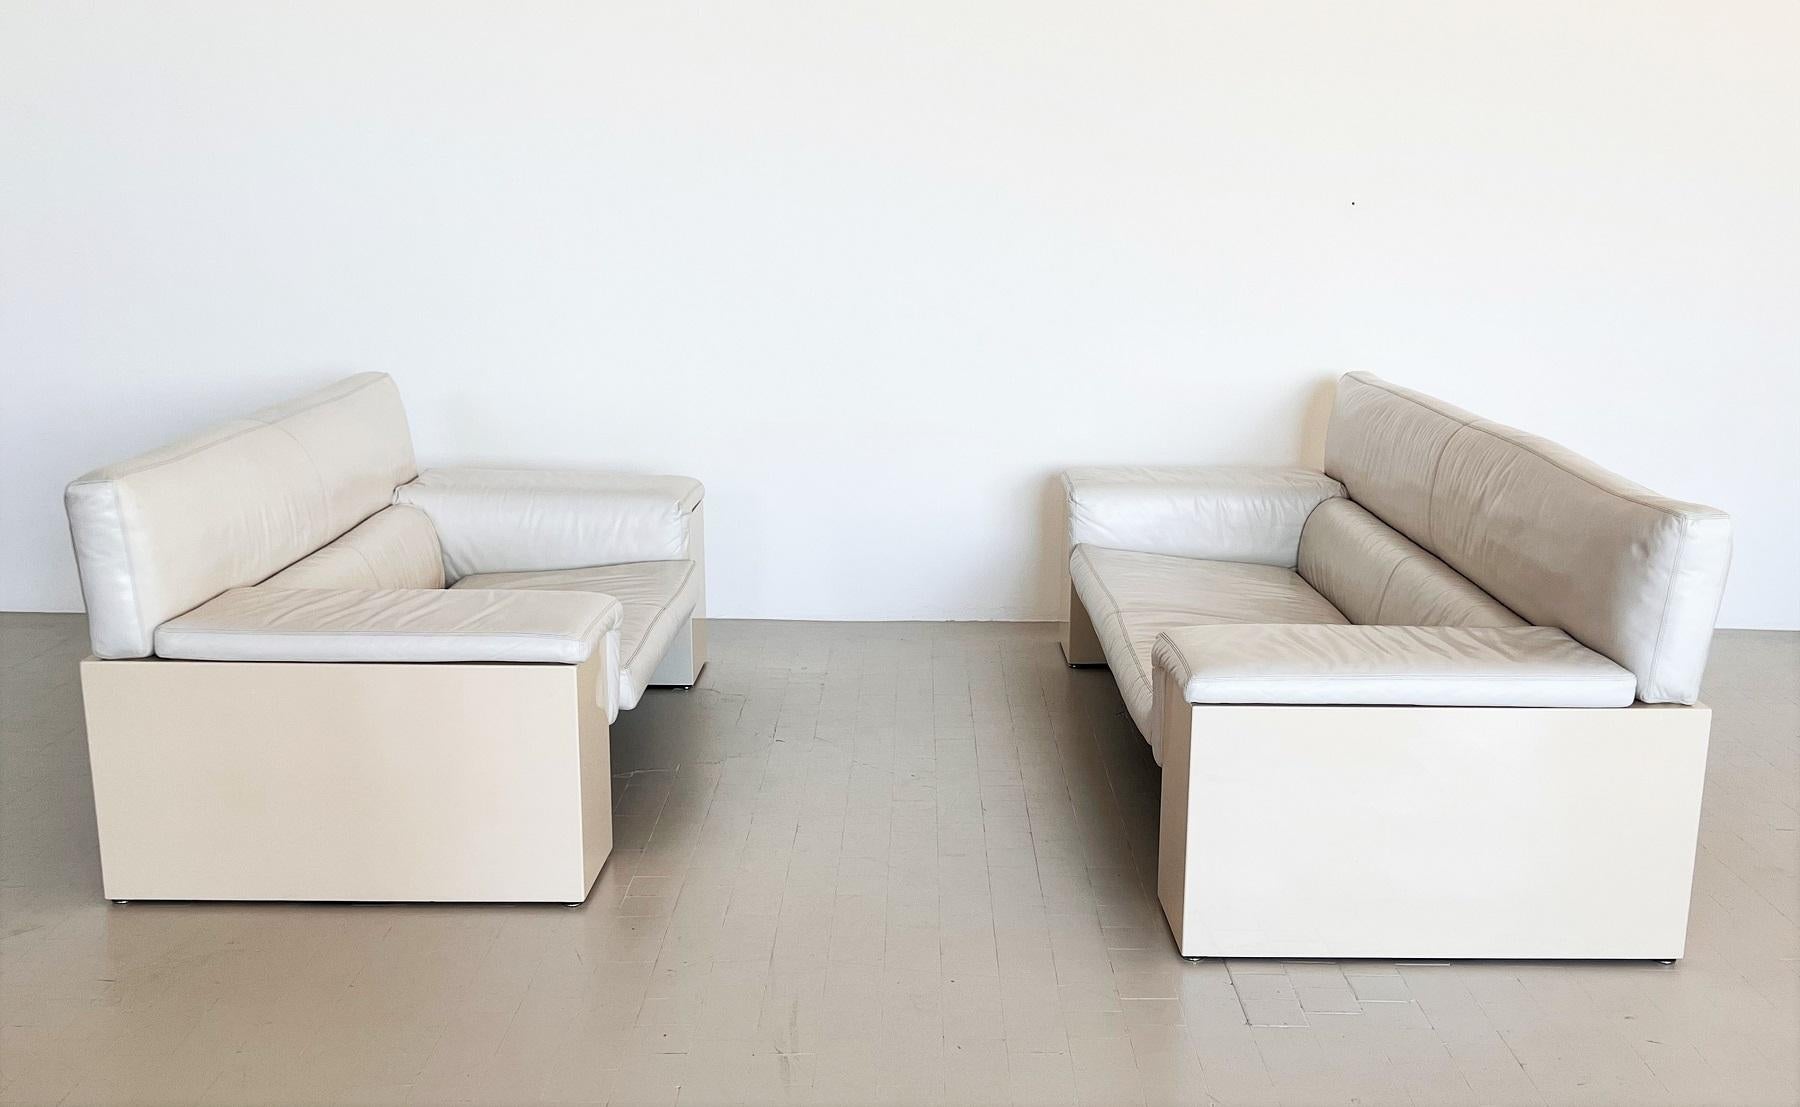 Cini Boeri for Knoll Two Seater Sofa 'Brigadier' in White Leather, 1970s 9